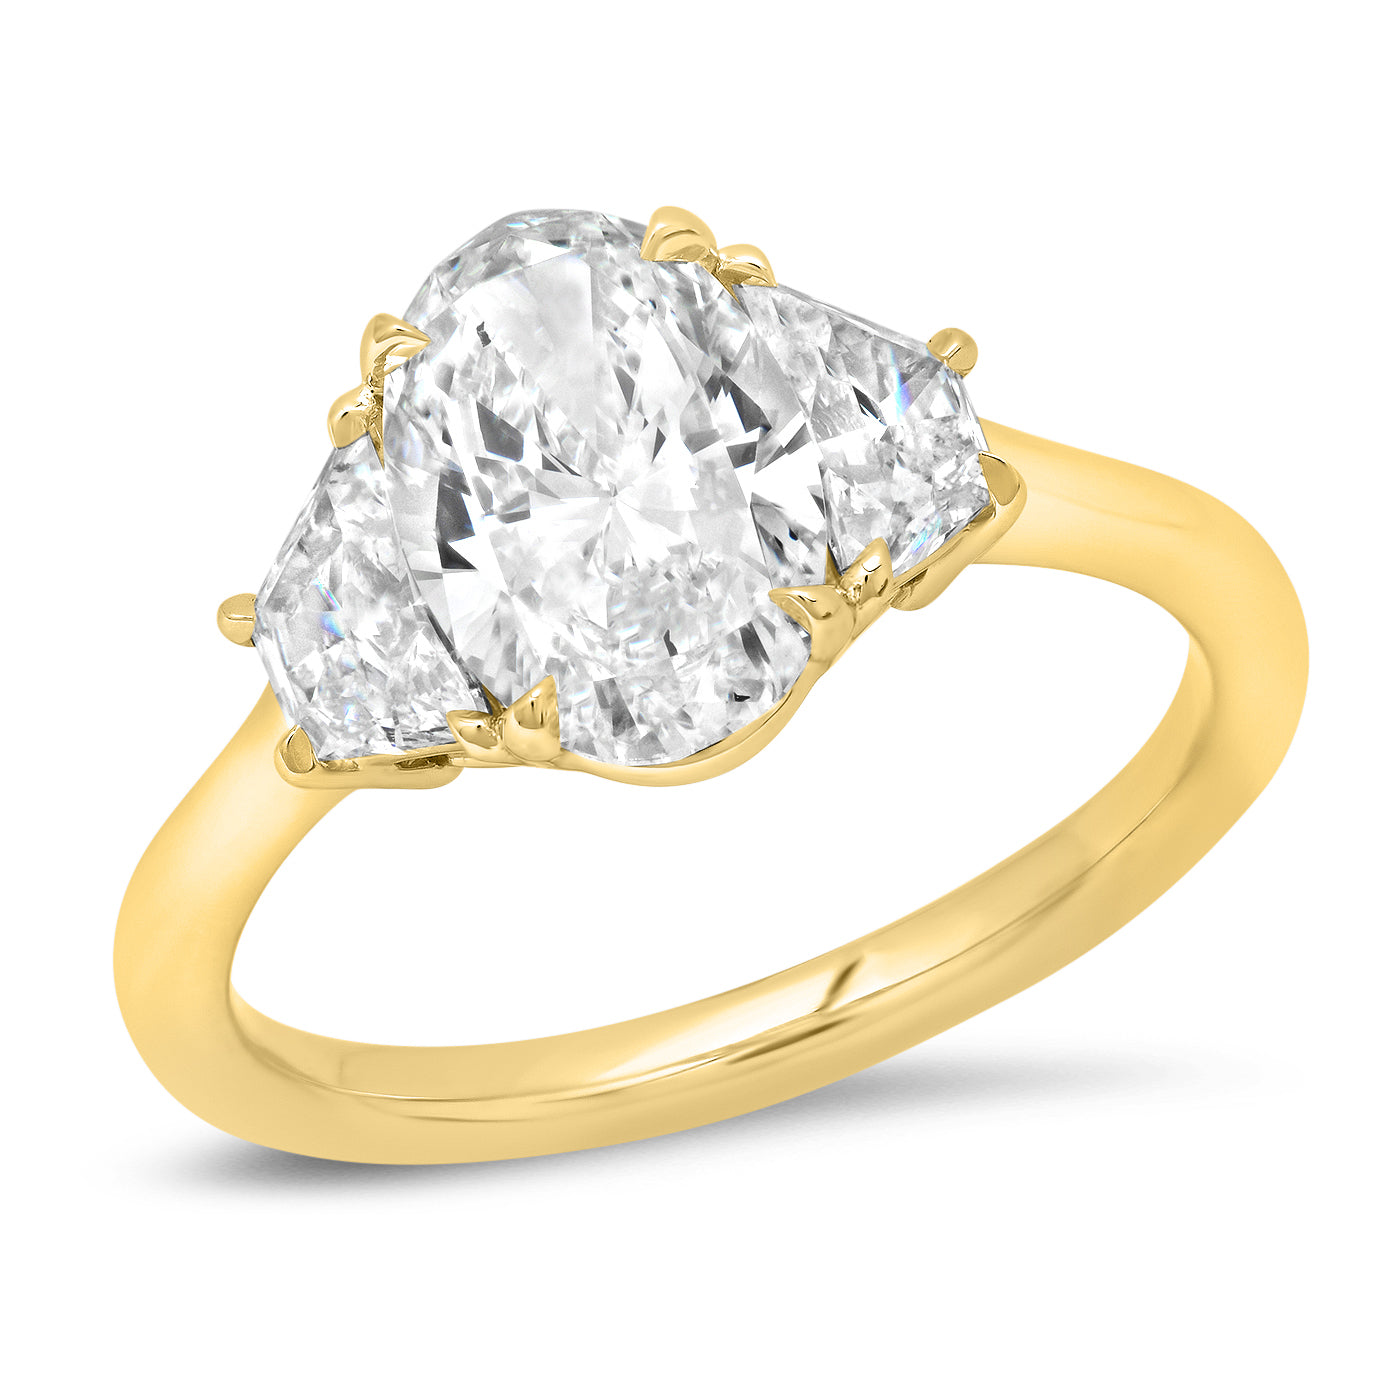 Sold - 2.01 Carat Oval Cut Engagement Ring